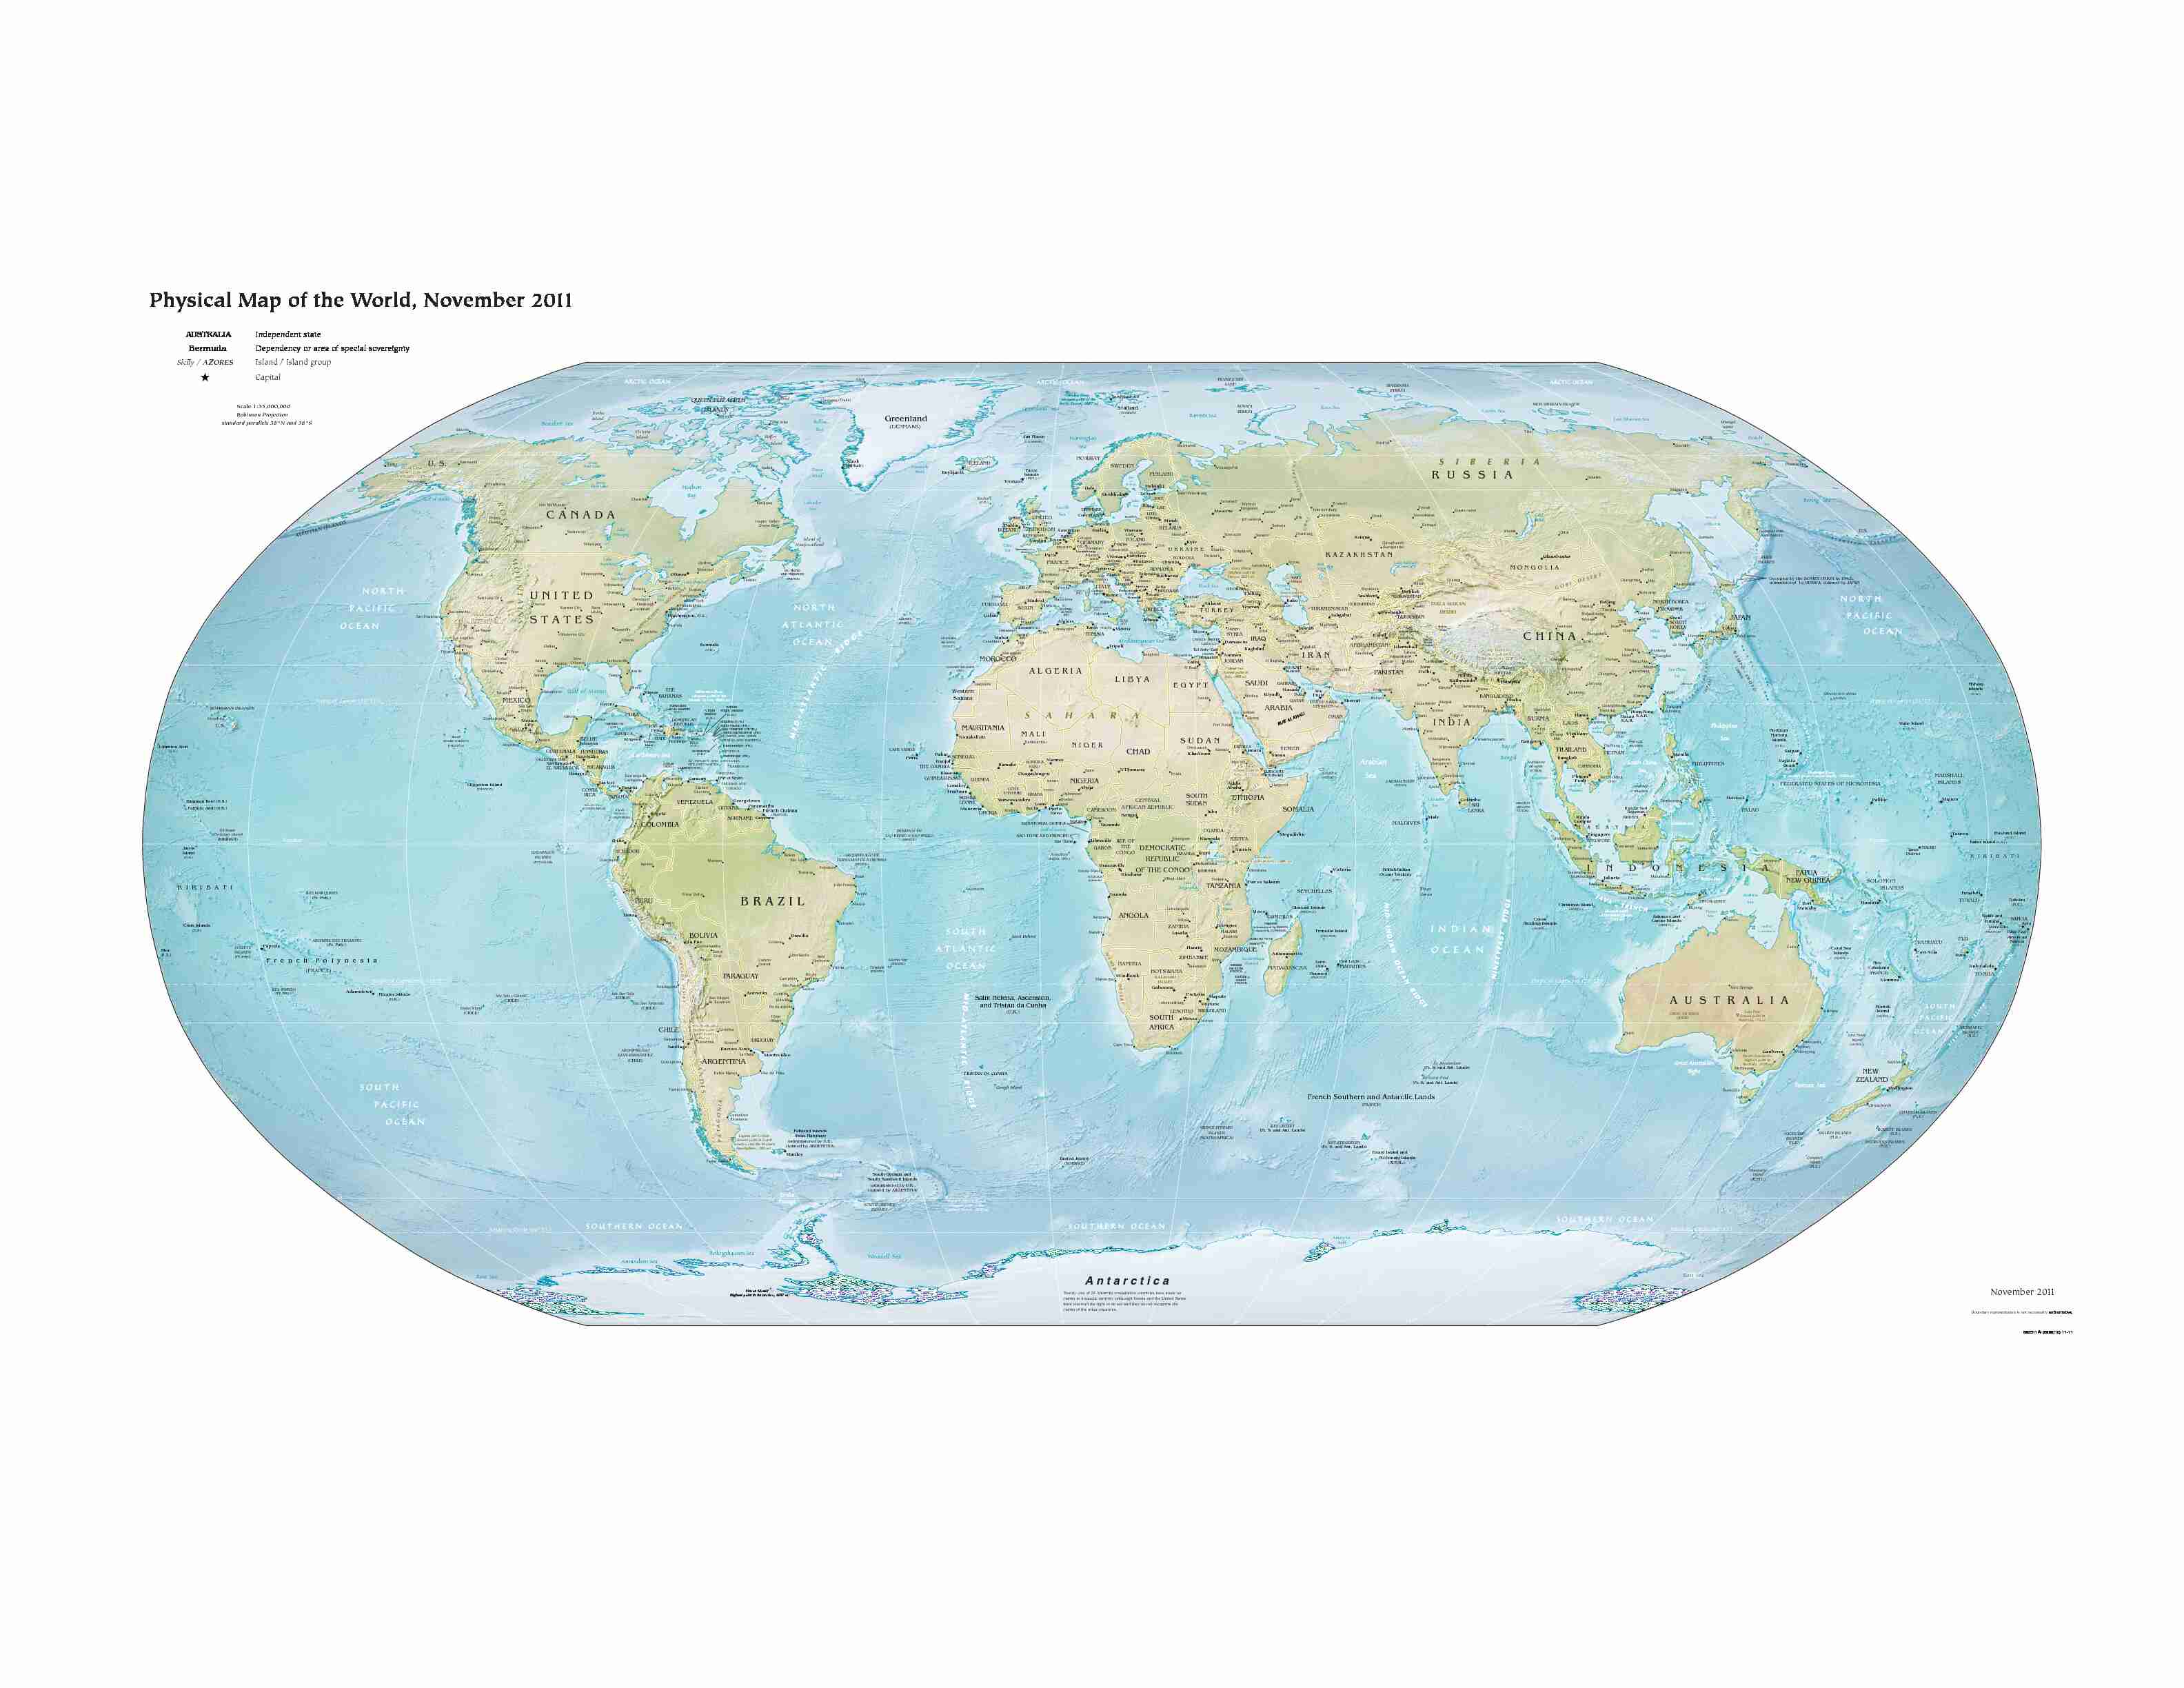 [PDF] Physical Map of the World, November 2011